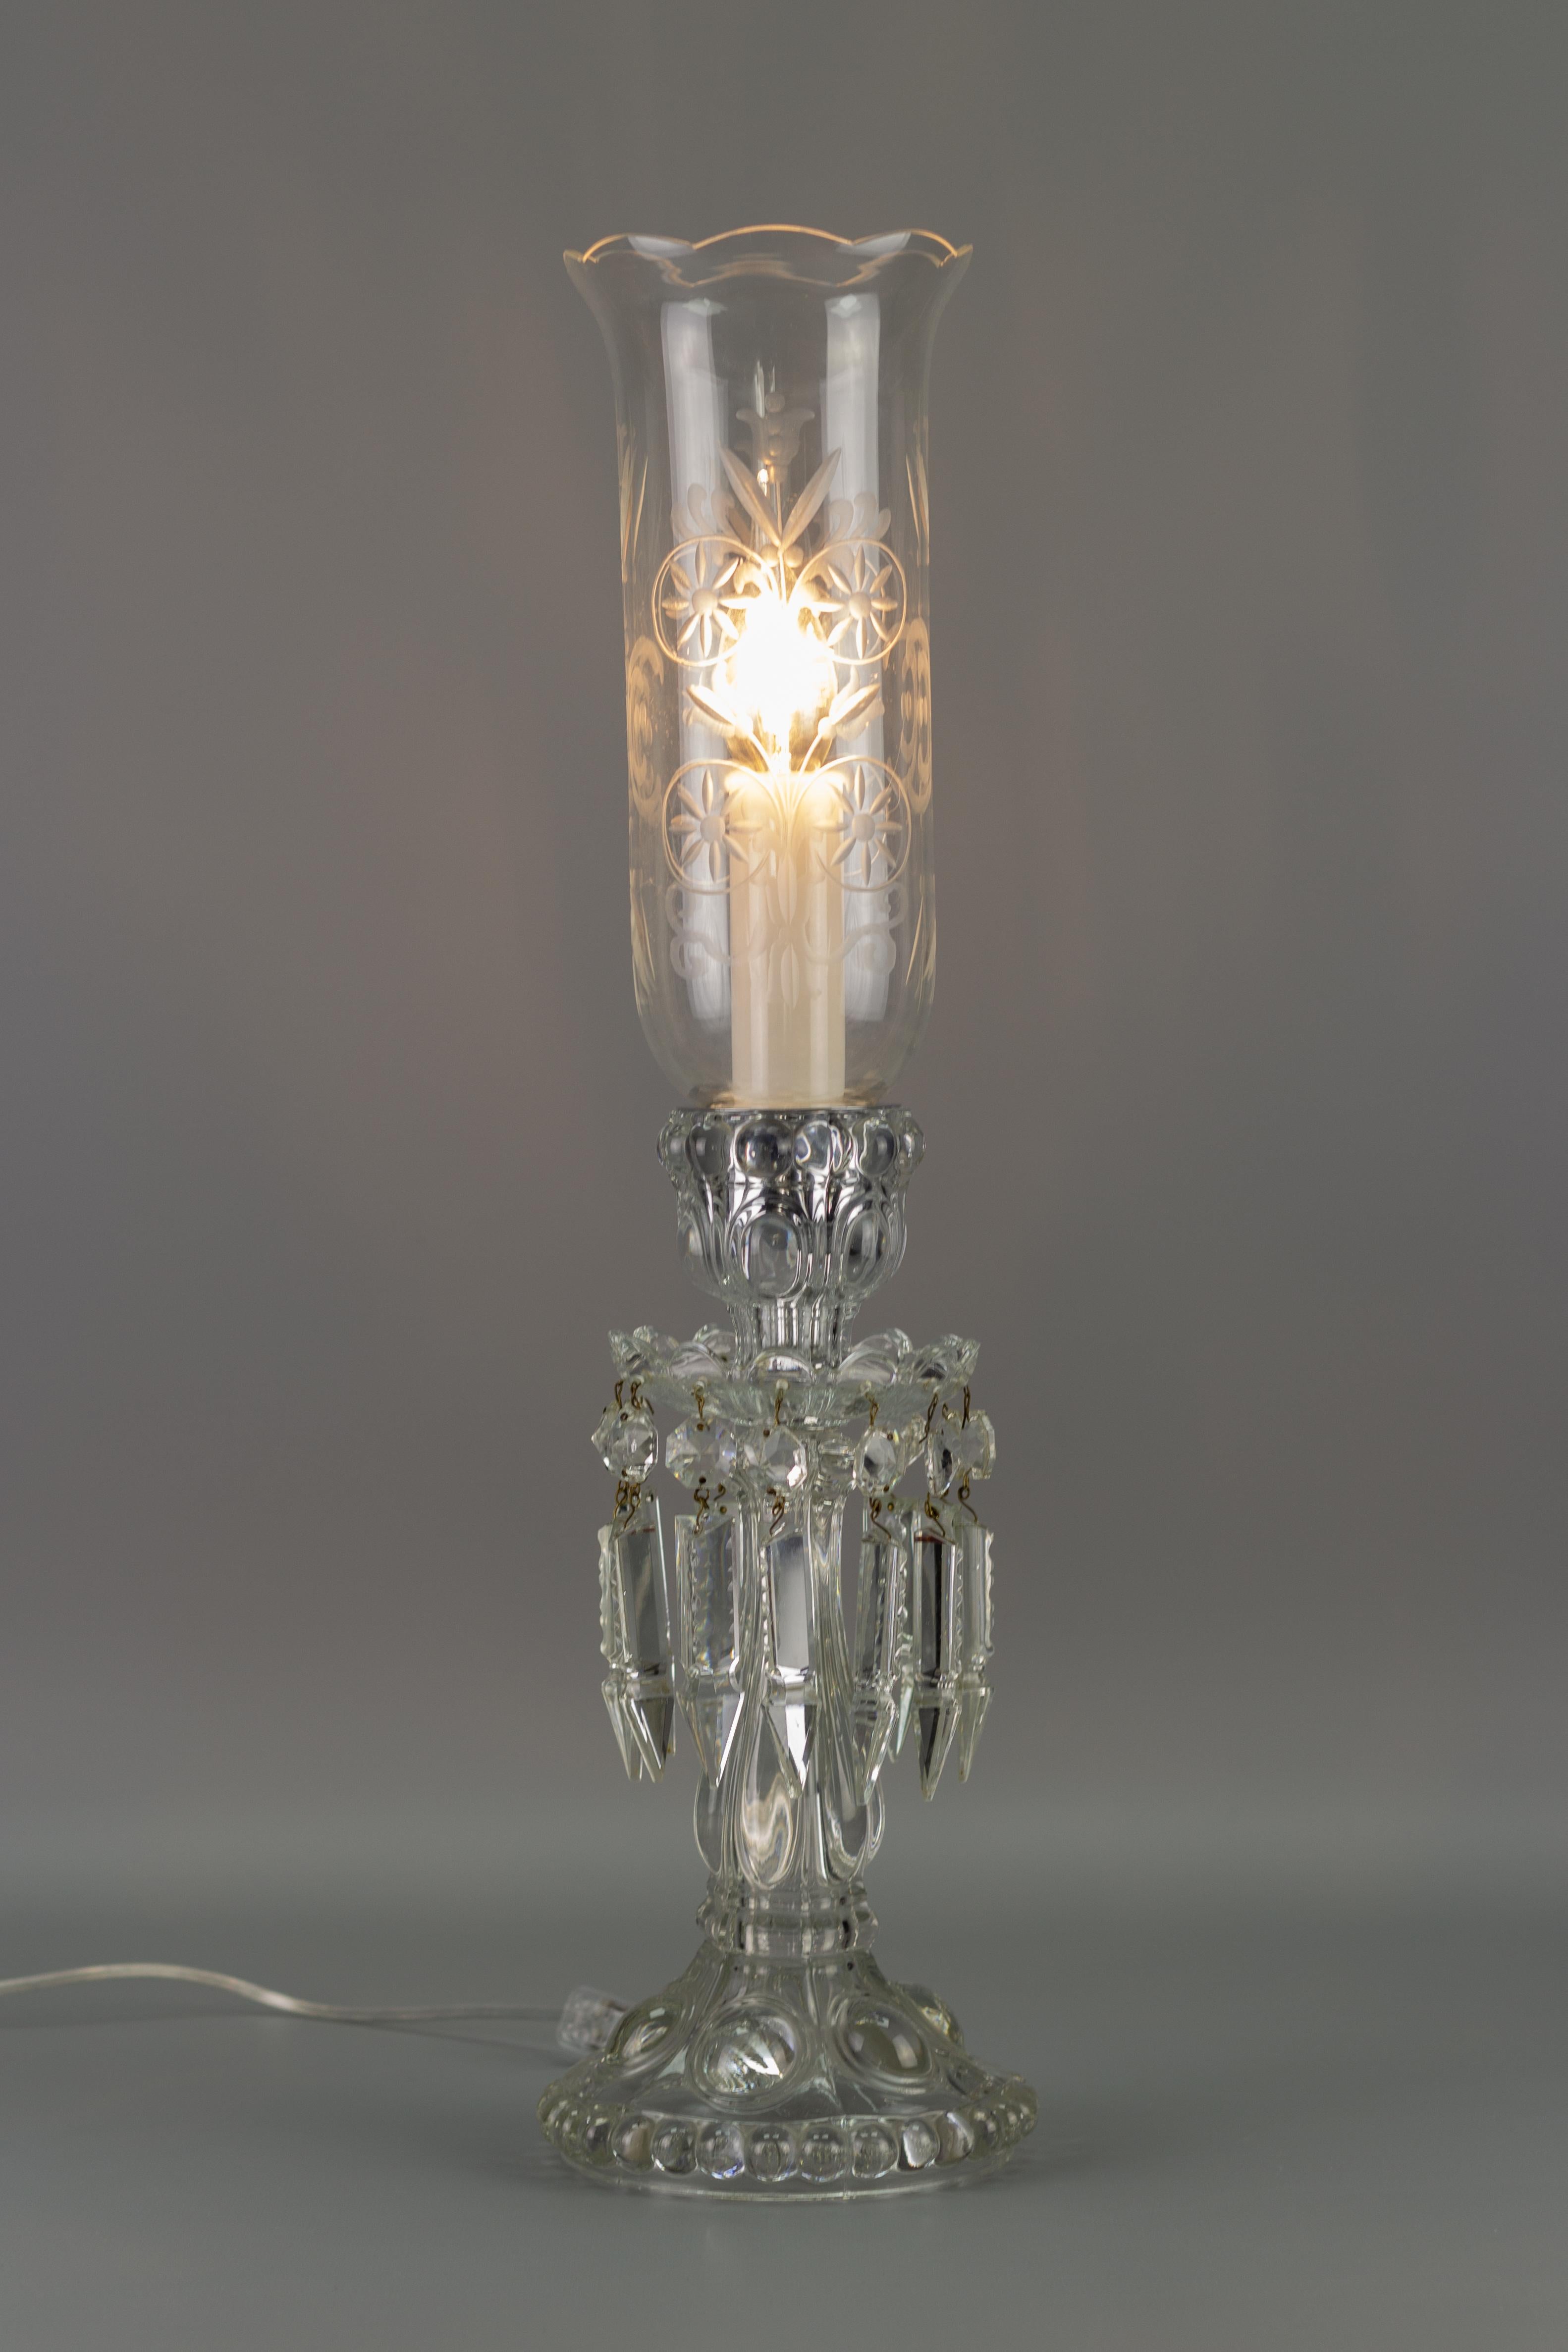 This wonderful vintage glass table lamp features a floral pattern cut into the beautifully shaped glass shade. The glass lamp is decorated with zipper cut crystal prisms. 
One socket for an E14 size light bulb.
Dimensions: height: 59 cm / 23.22